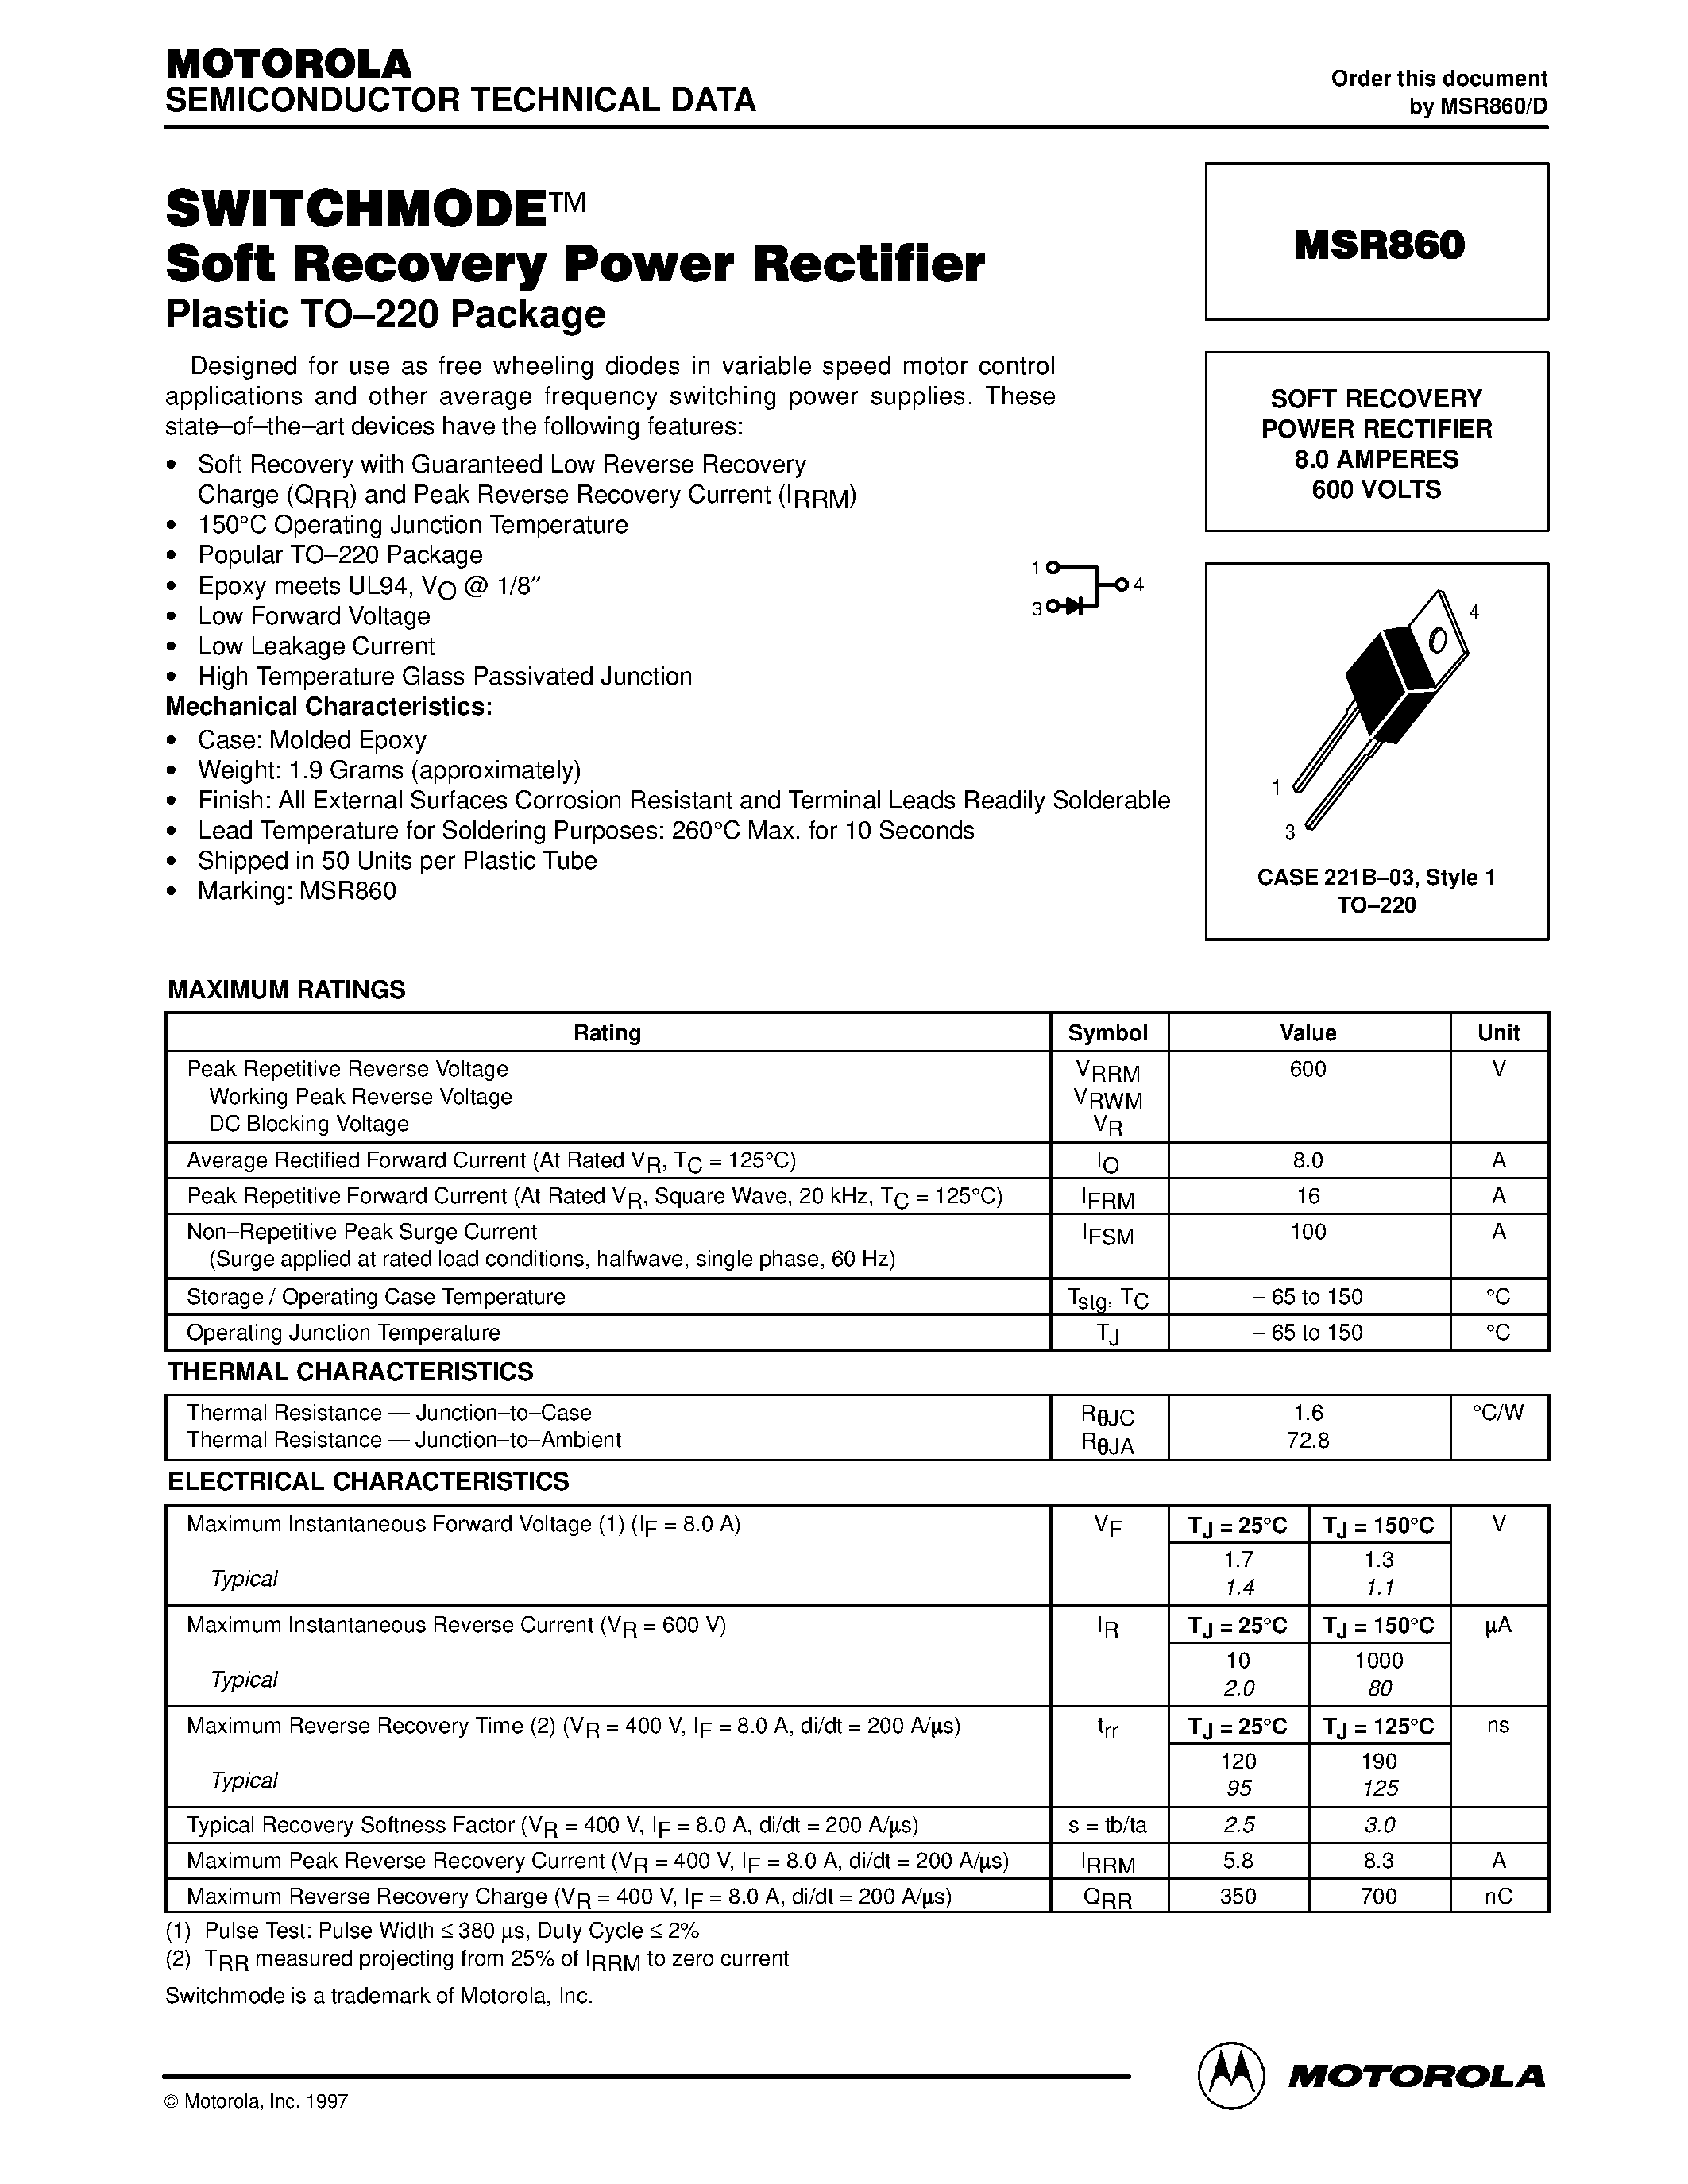 Datasheet MSR860 - SOFT RECOVERY POWER RECTIFIER 8.0 AMPERES 600 VOLTS page 1